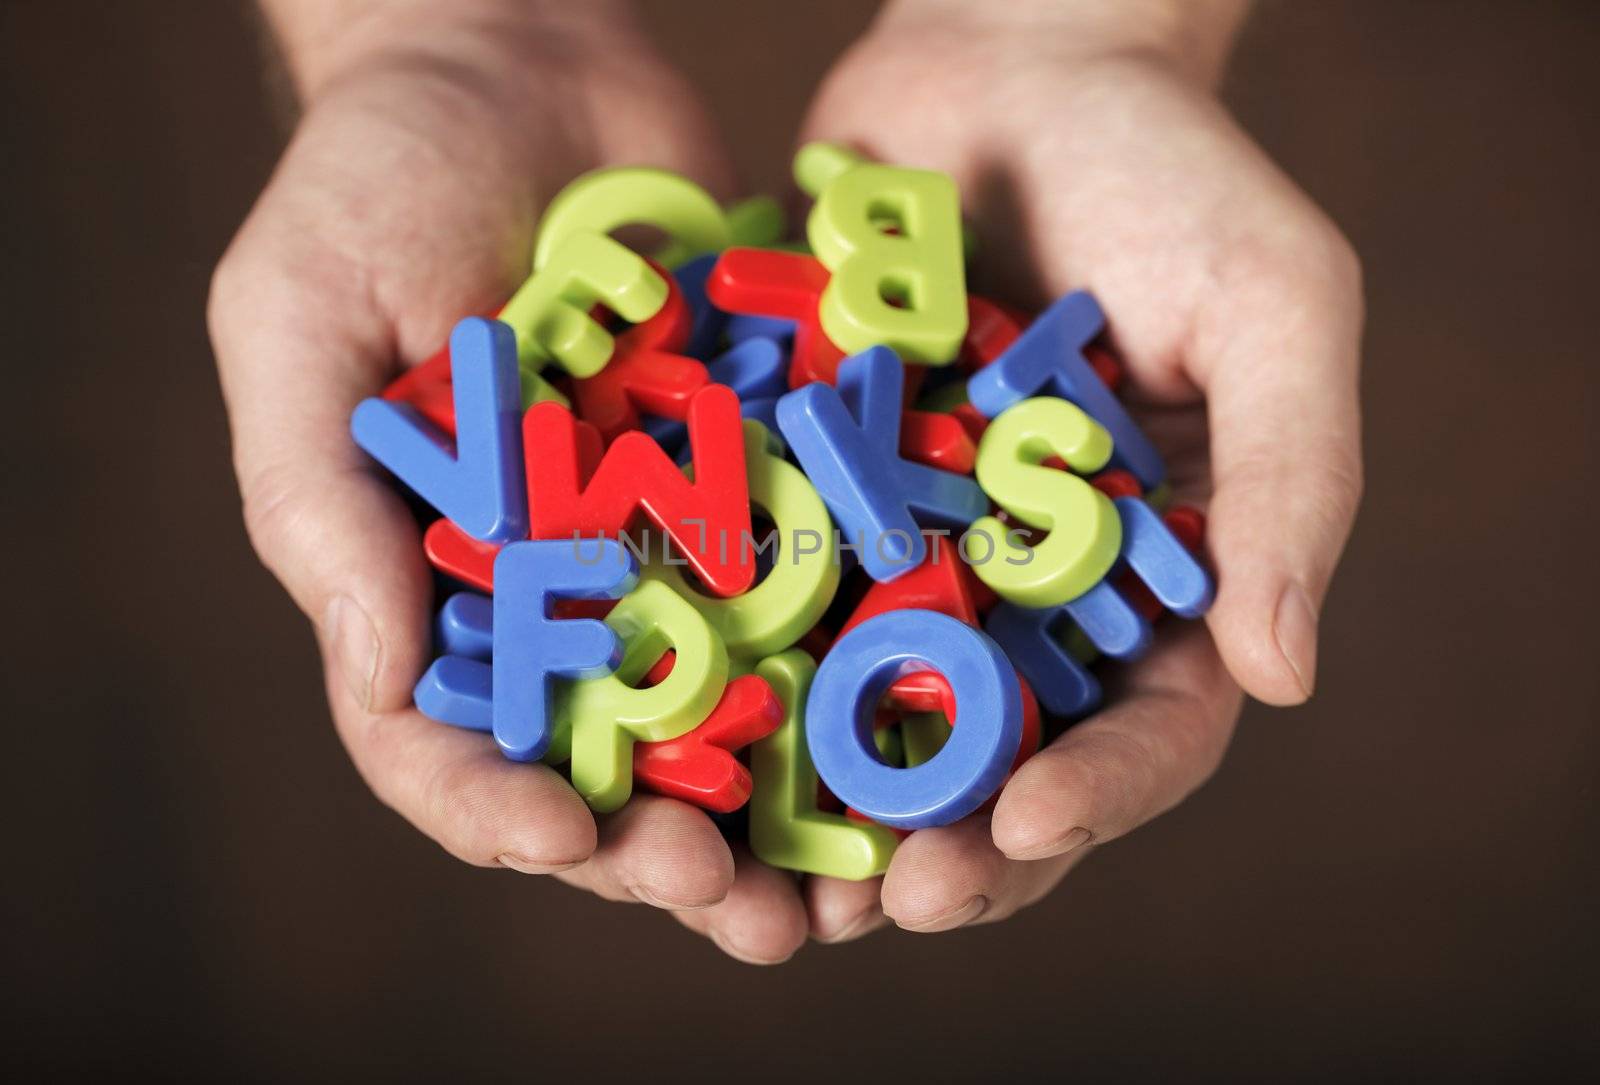 Man holding colorful plastic letters in his hands. Very short depth-of-field.